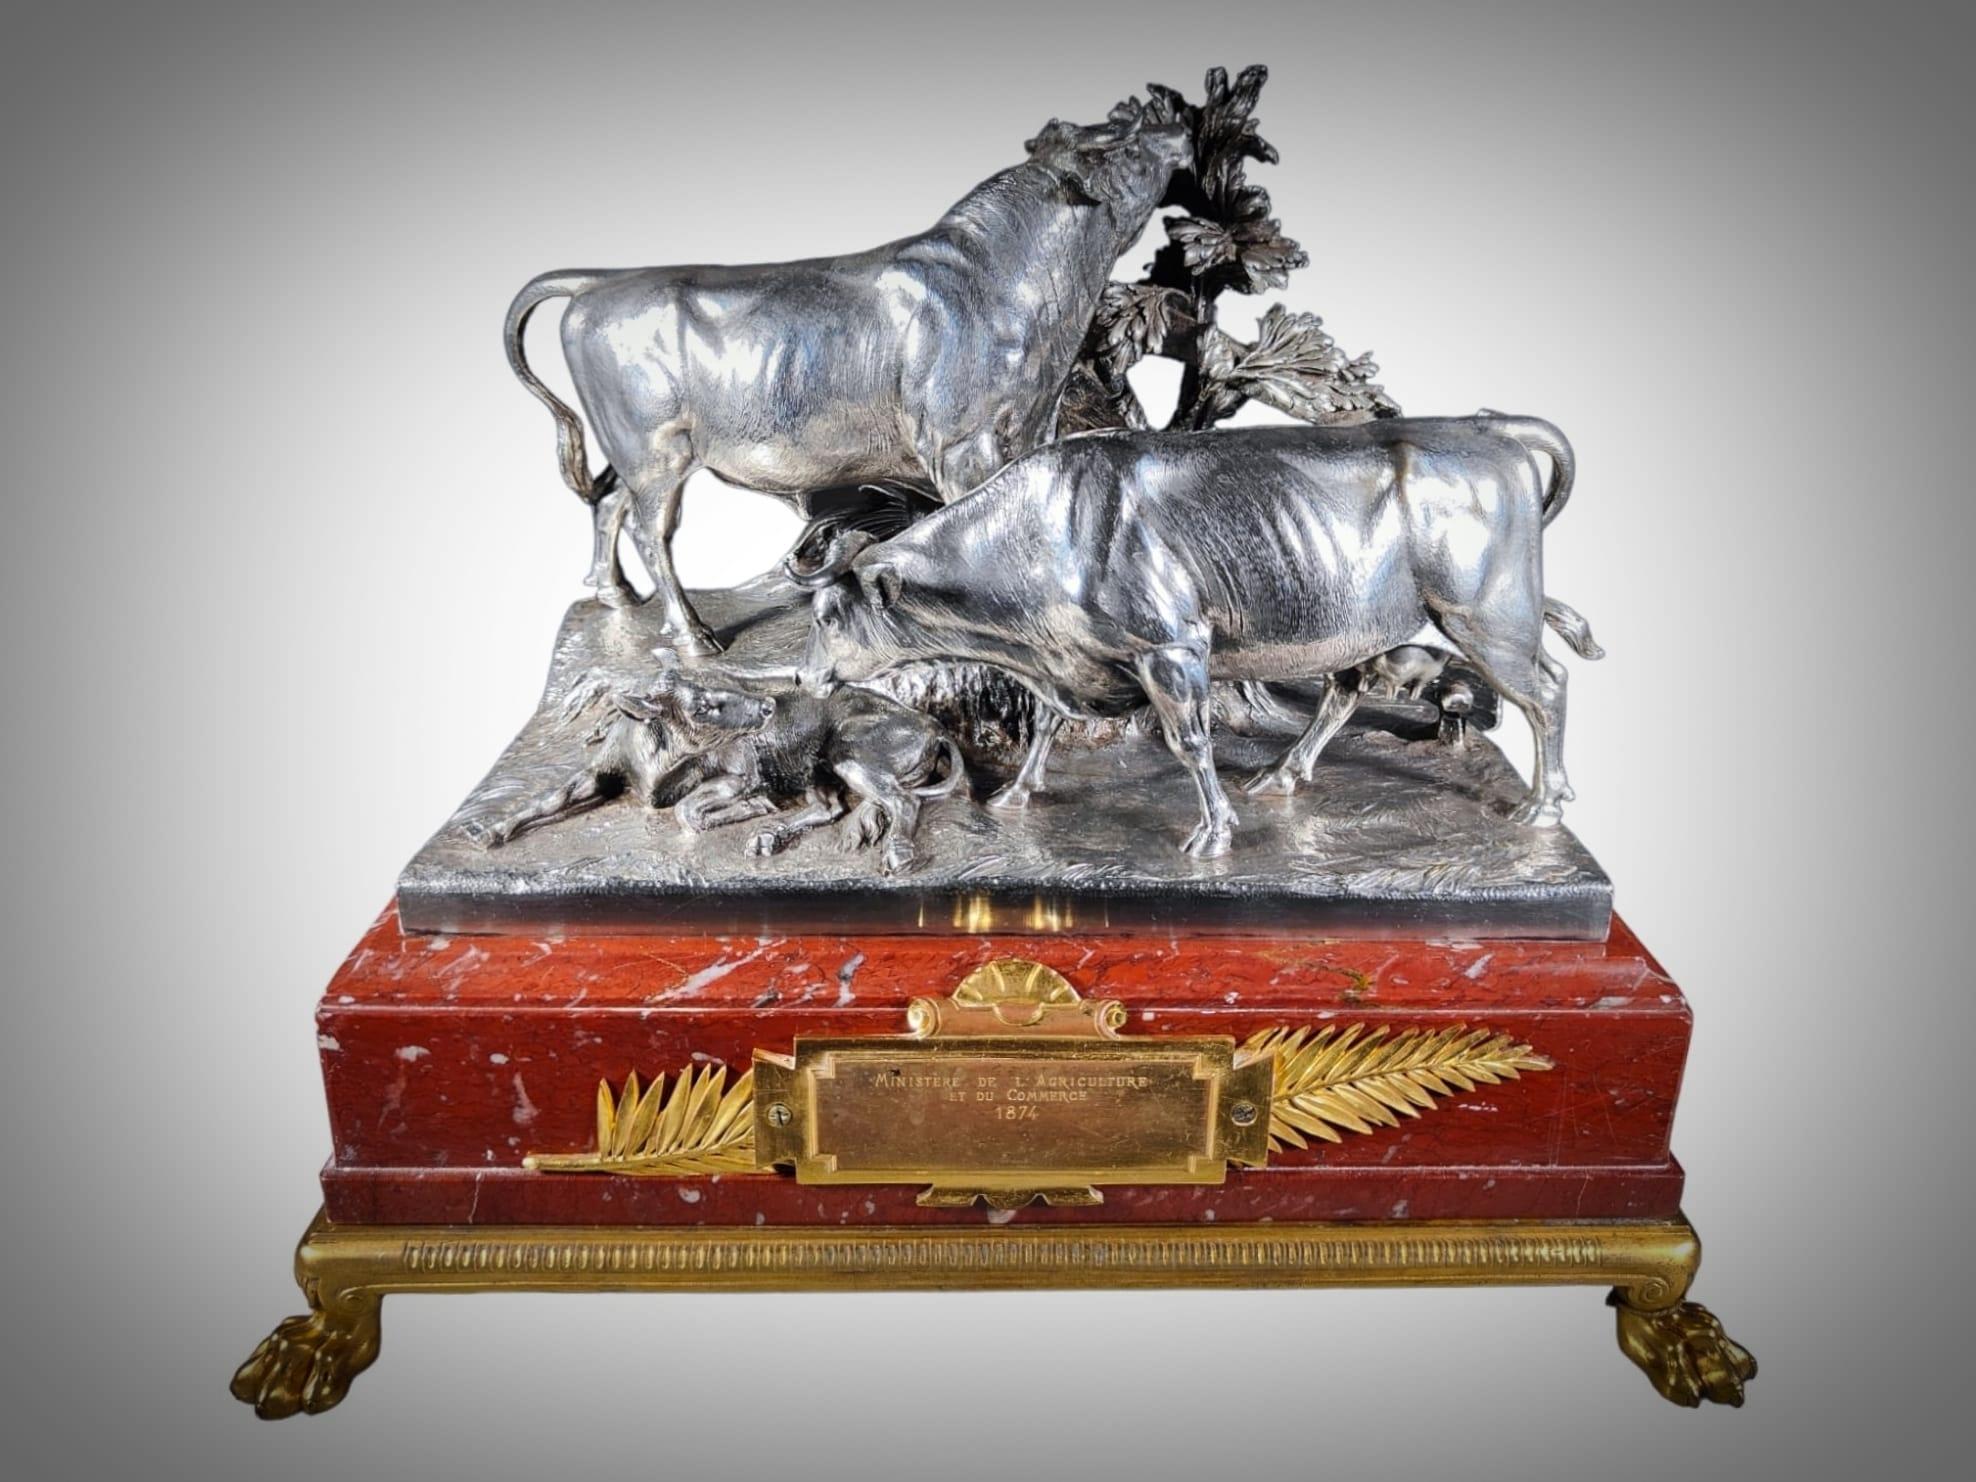 A Christofle & Cie Silverplated Bronze Presentation Group Of A Bull, A Cow And A Calf Paris 1874
Incised Christofle & Cie on a rouge royale marble base with a gilt bronze plinth and feet, with an inscription plaque inscribed MINISTERE DE